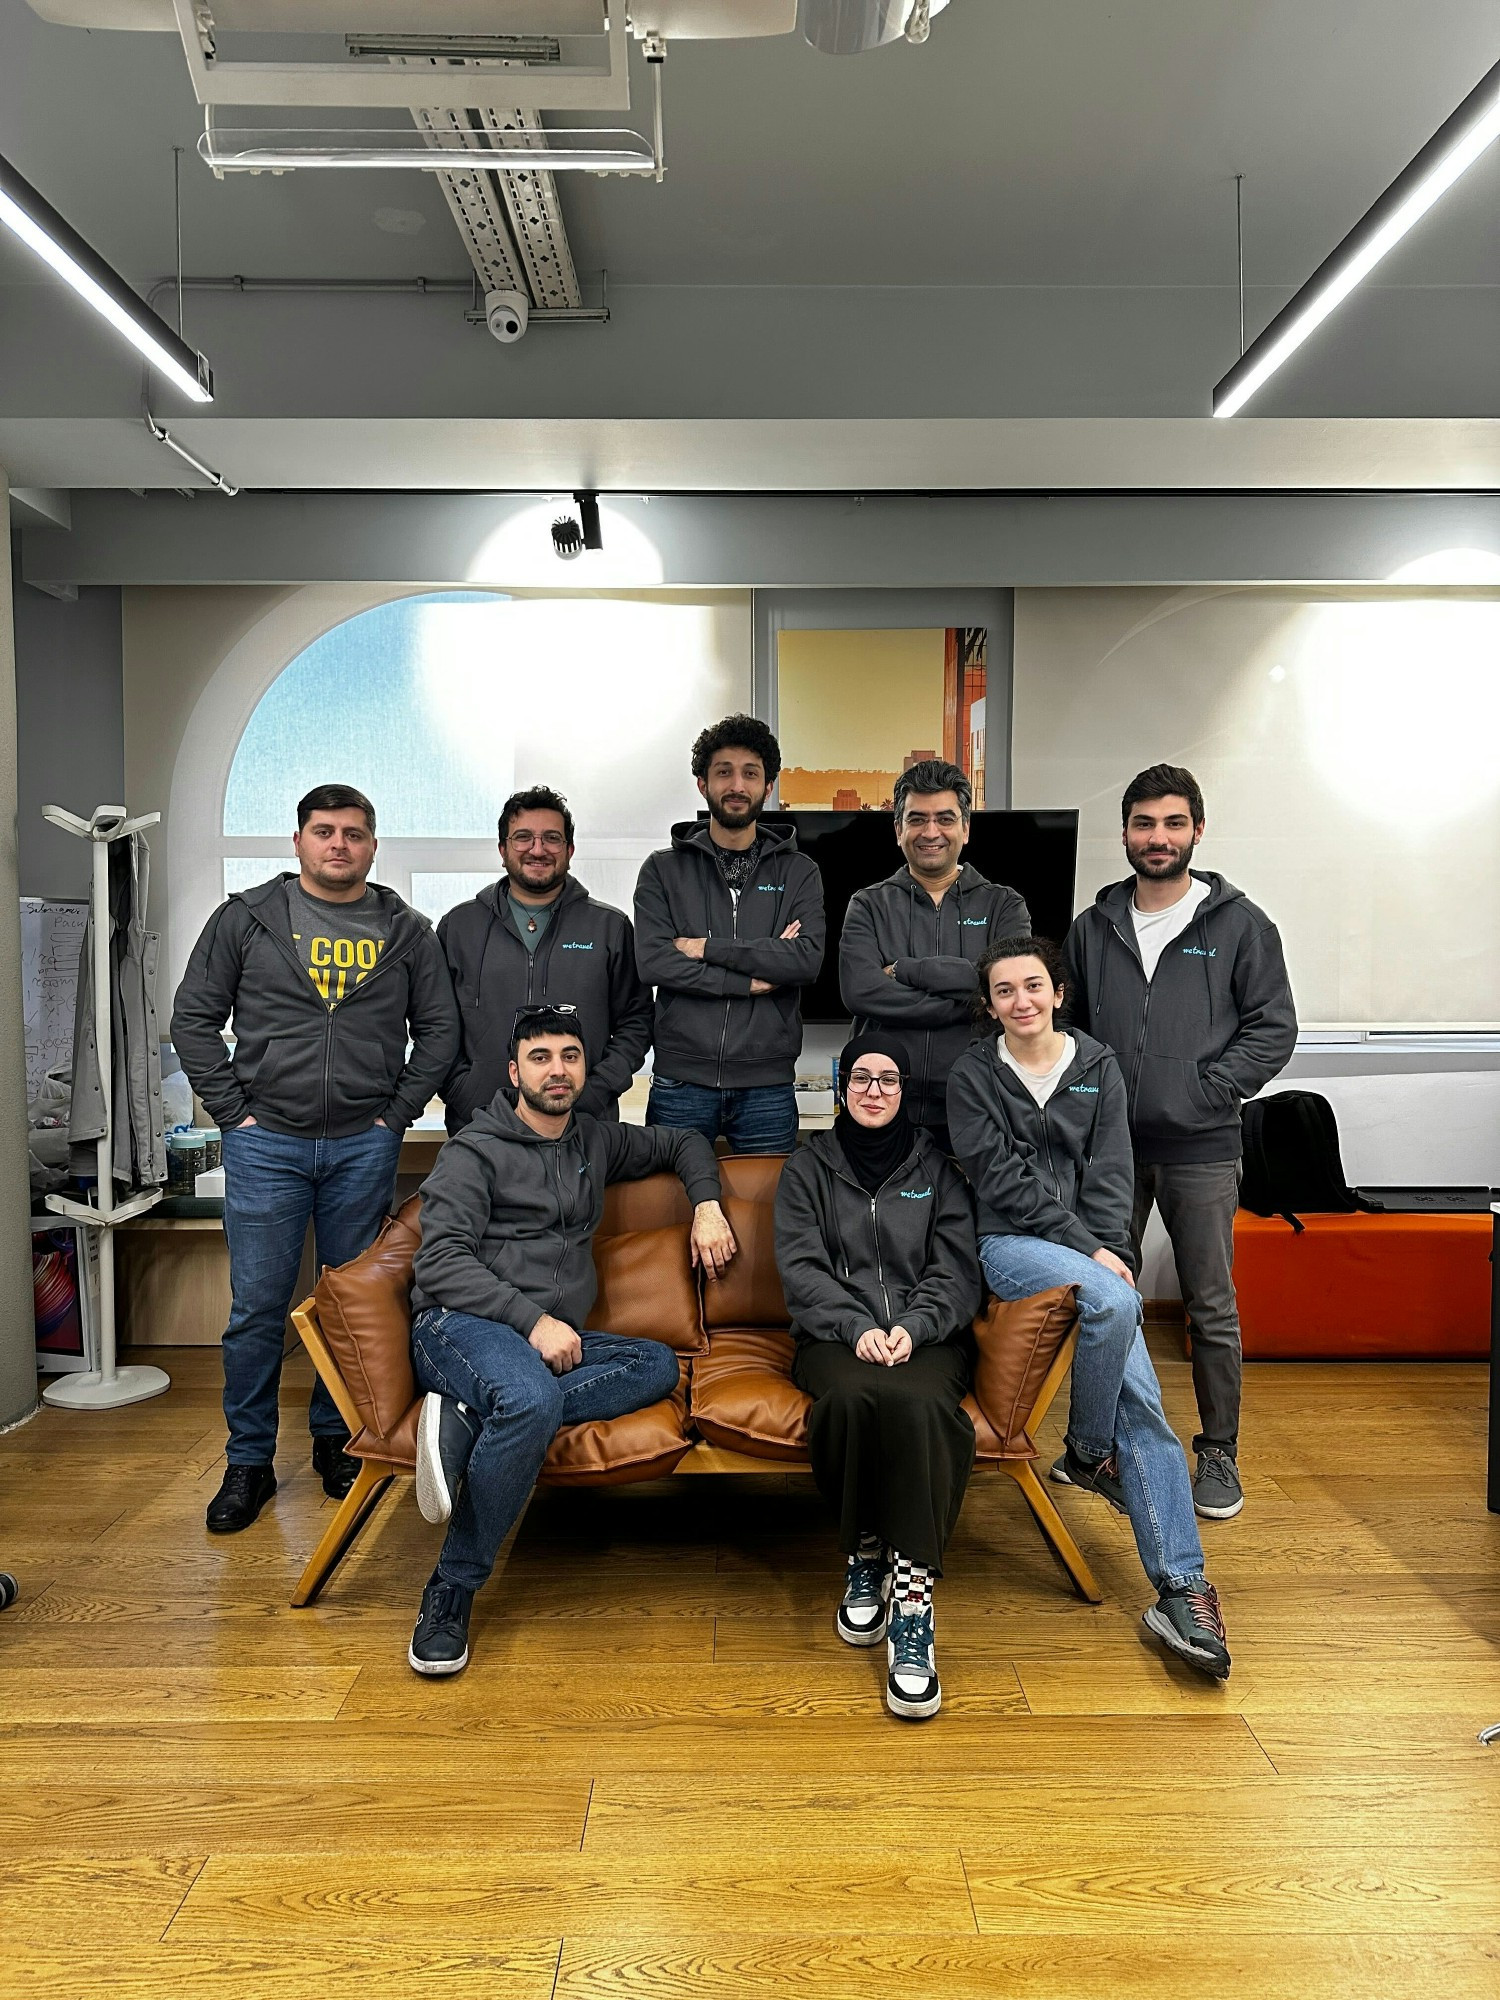 Our team in Baku with their WeTravel hoodies! 